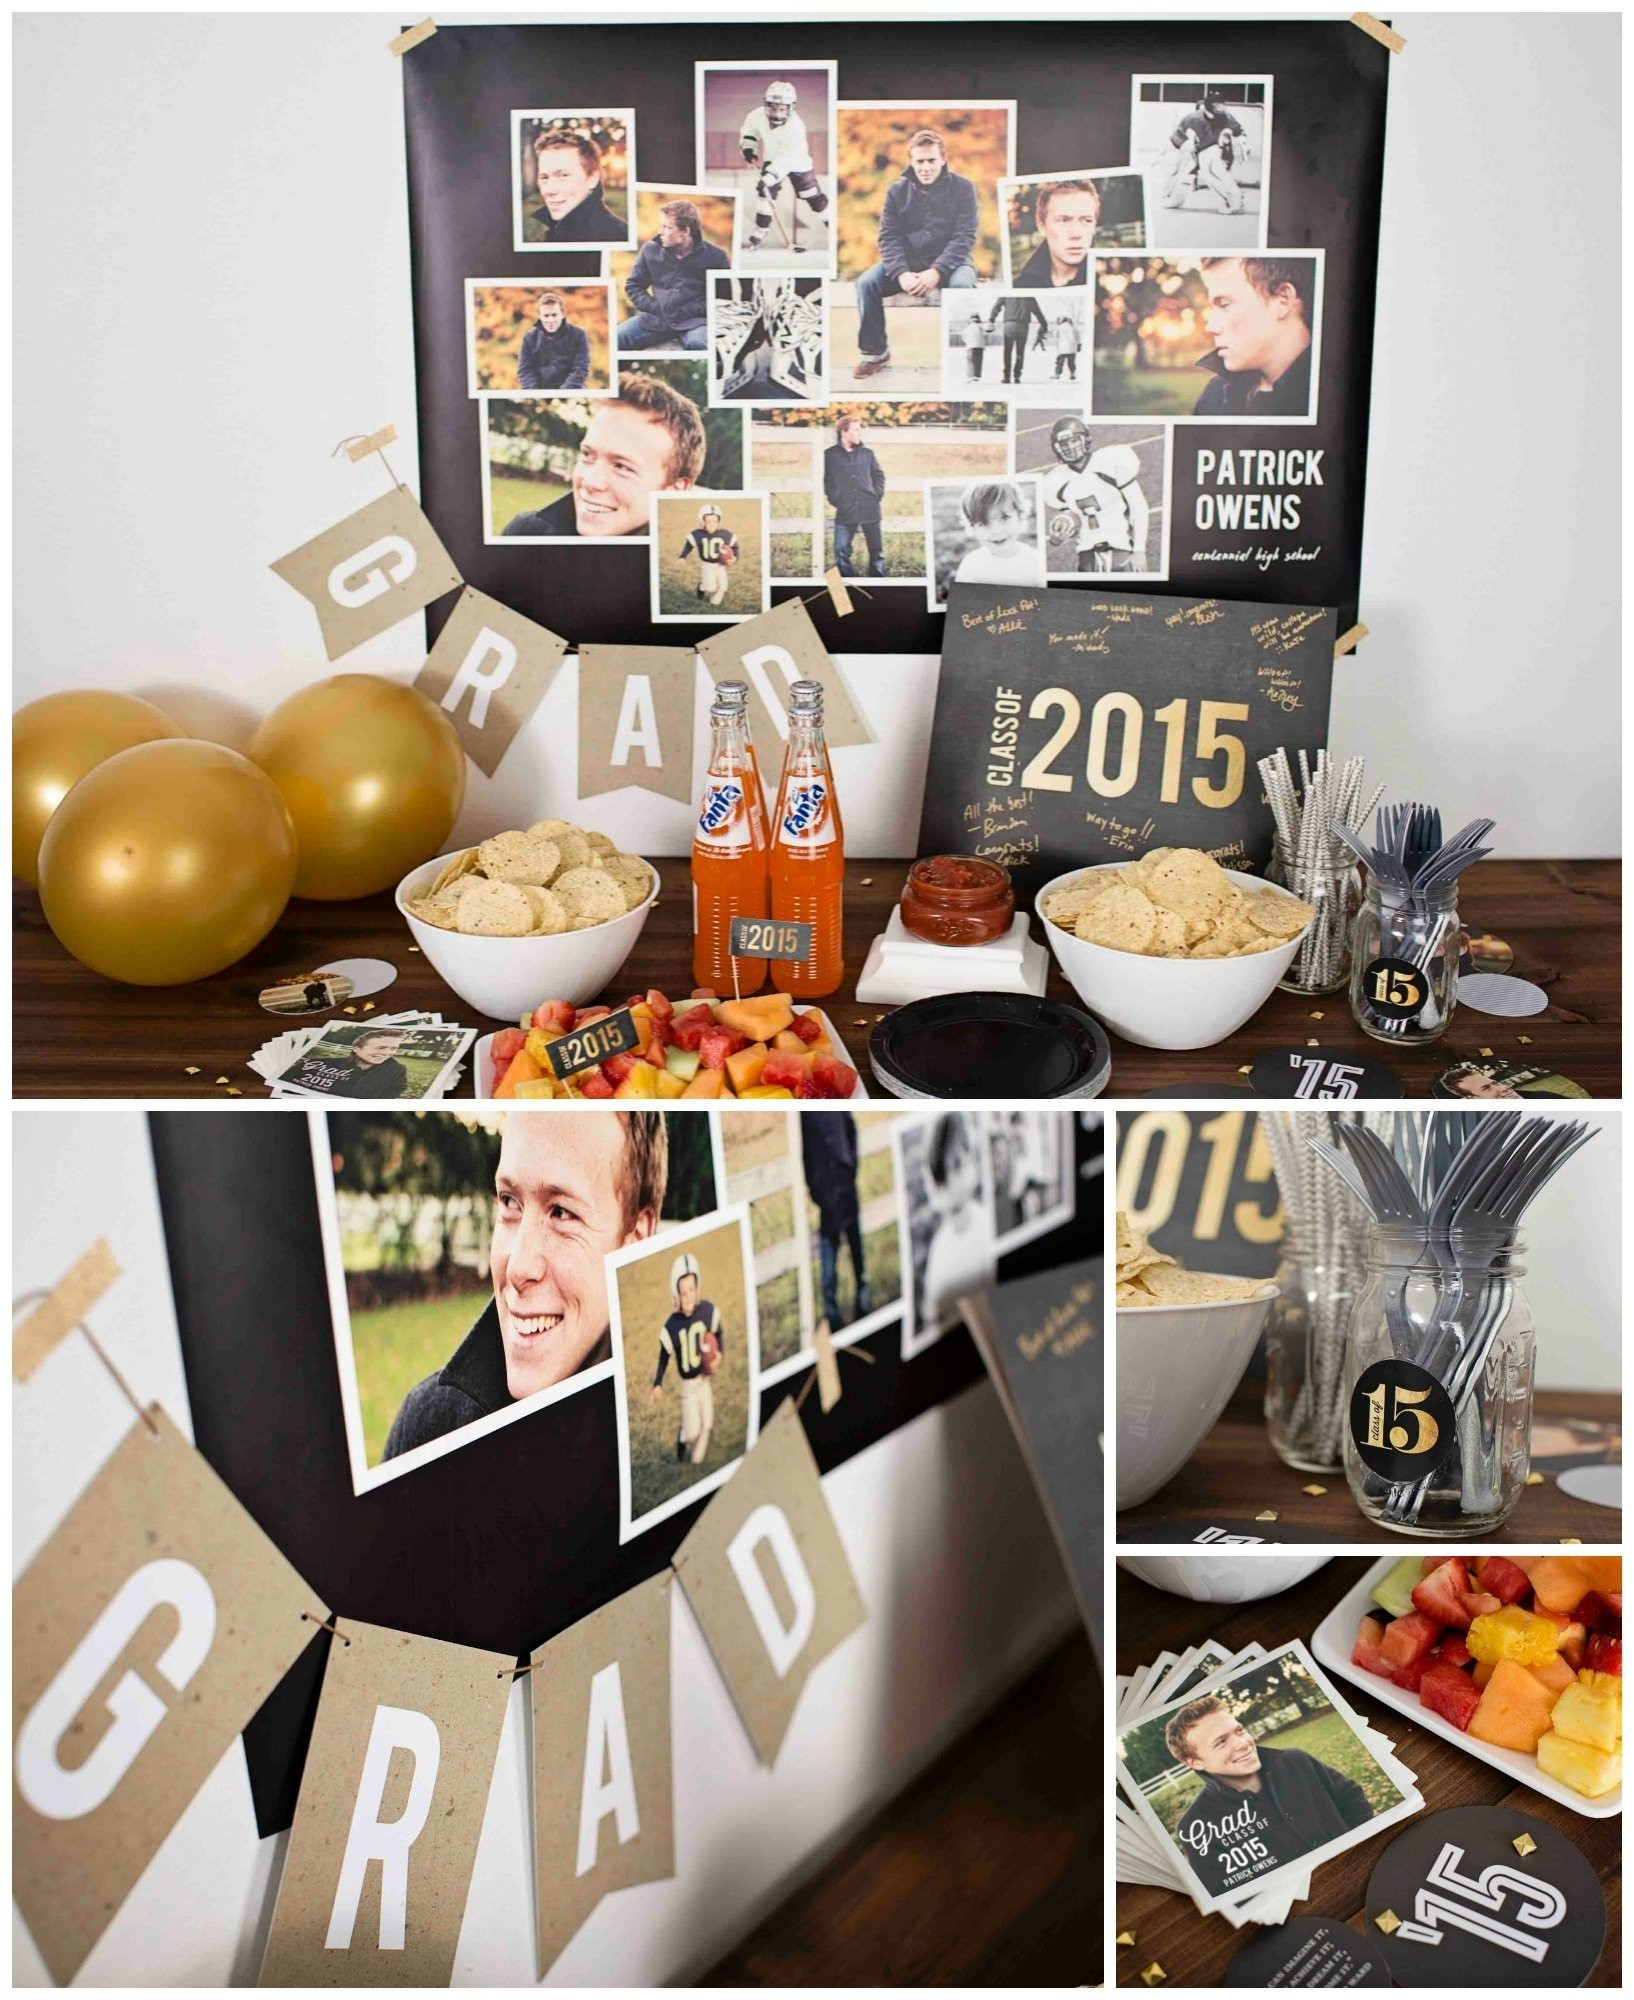 Graduation Party Decoration Ideas For Guys
 10 Best High School Graduation Party Ideas For Boys 2020